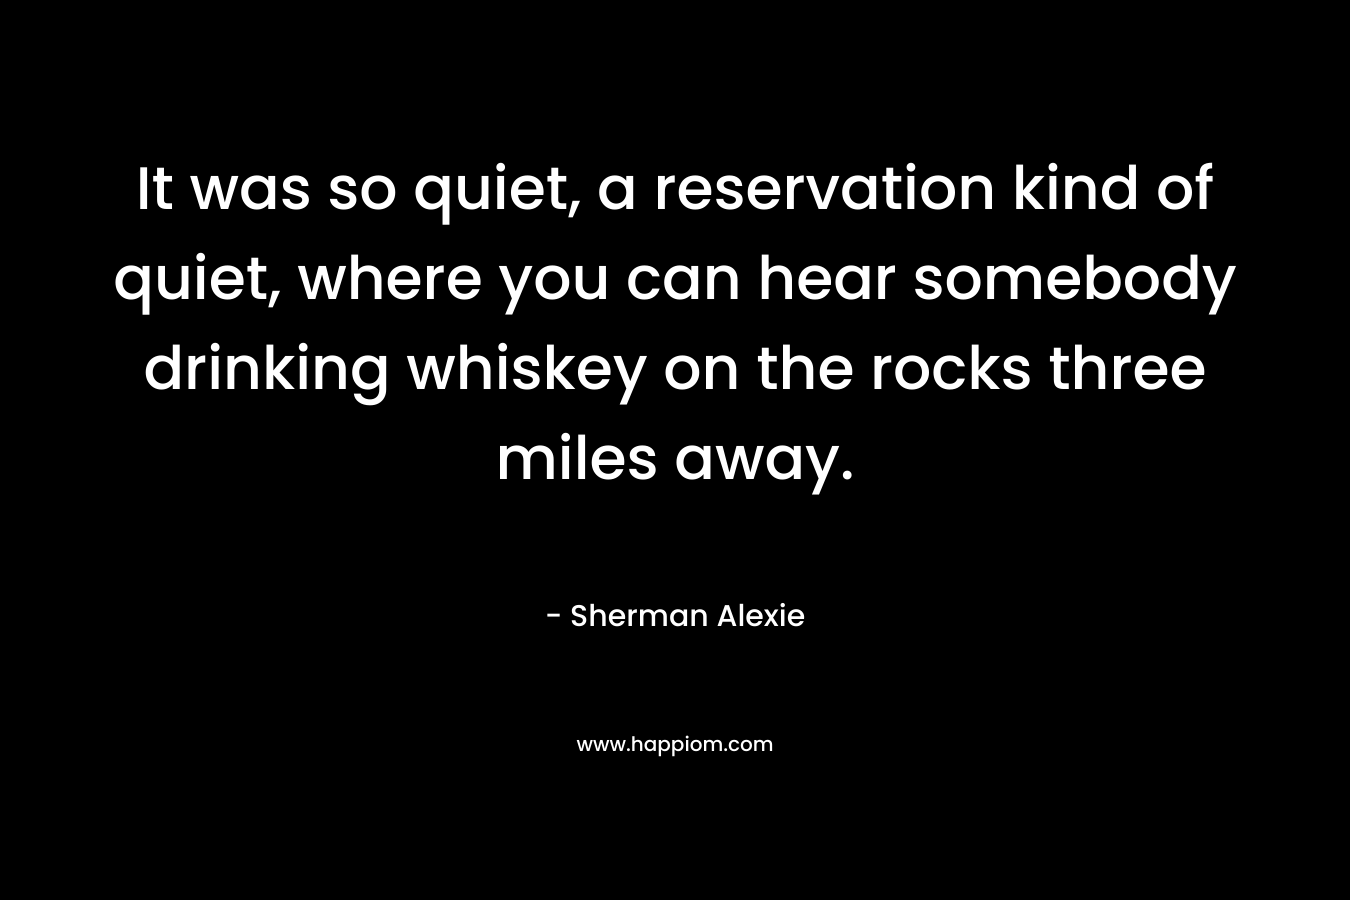 It was so quiet, a reservation kind of quiet, where you can hear somebody drinking whiskey on the rocks three miles away. – Sherman Alexie